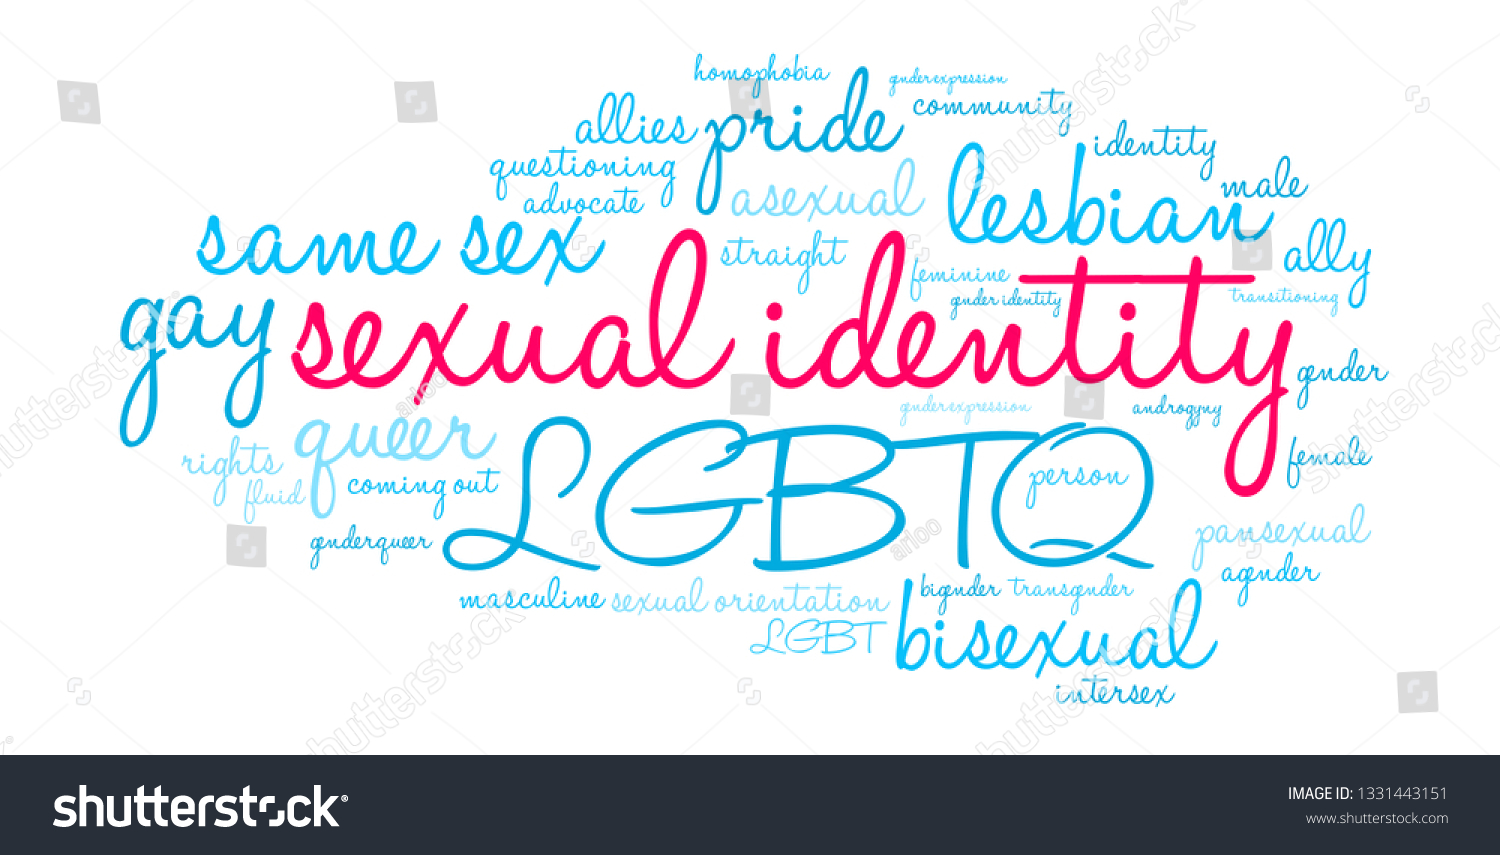 Sexual Identity Word Cloud On White Stock Vector Royalty Free 1331443151 Shutterstock 3627